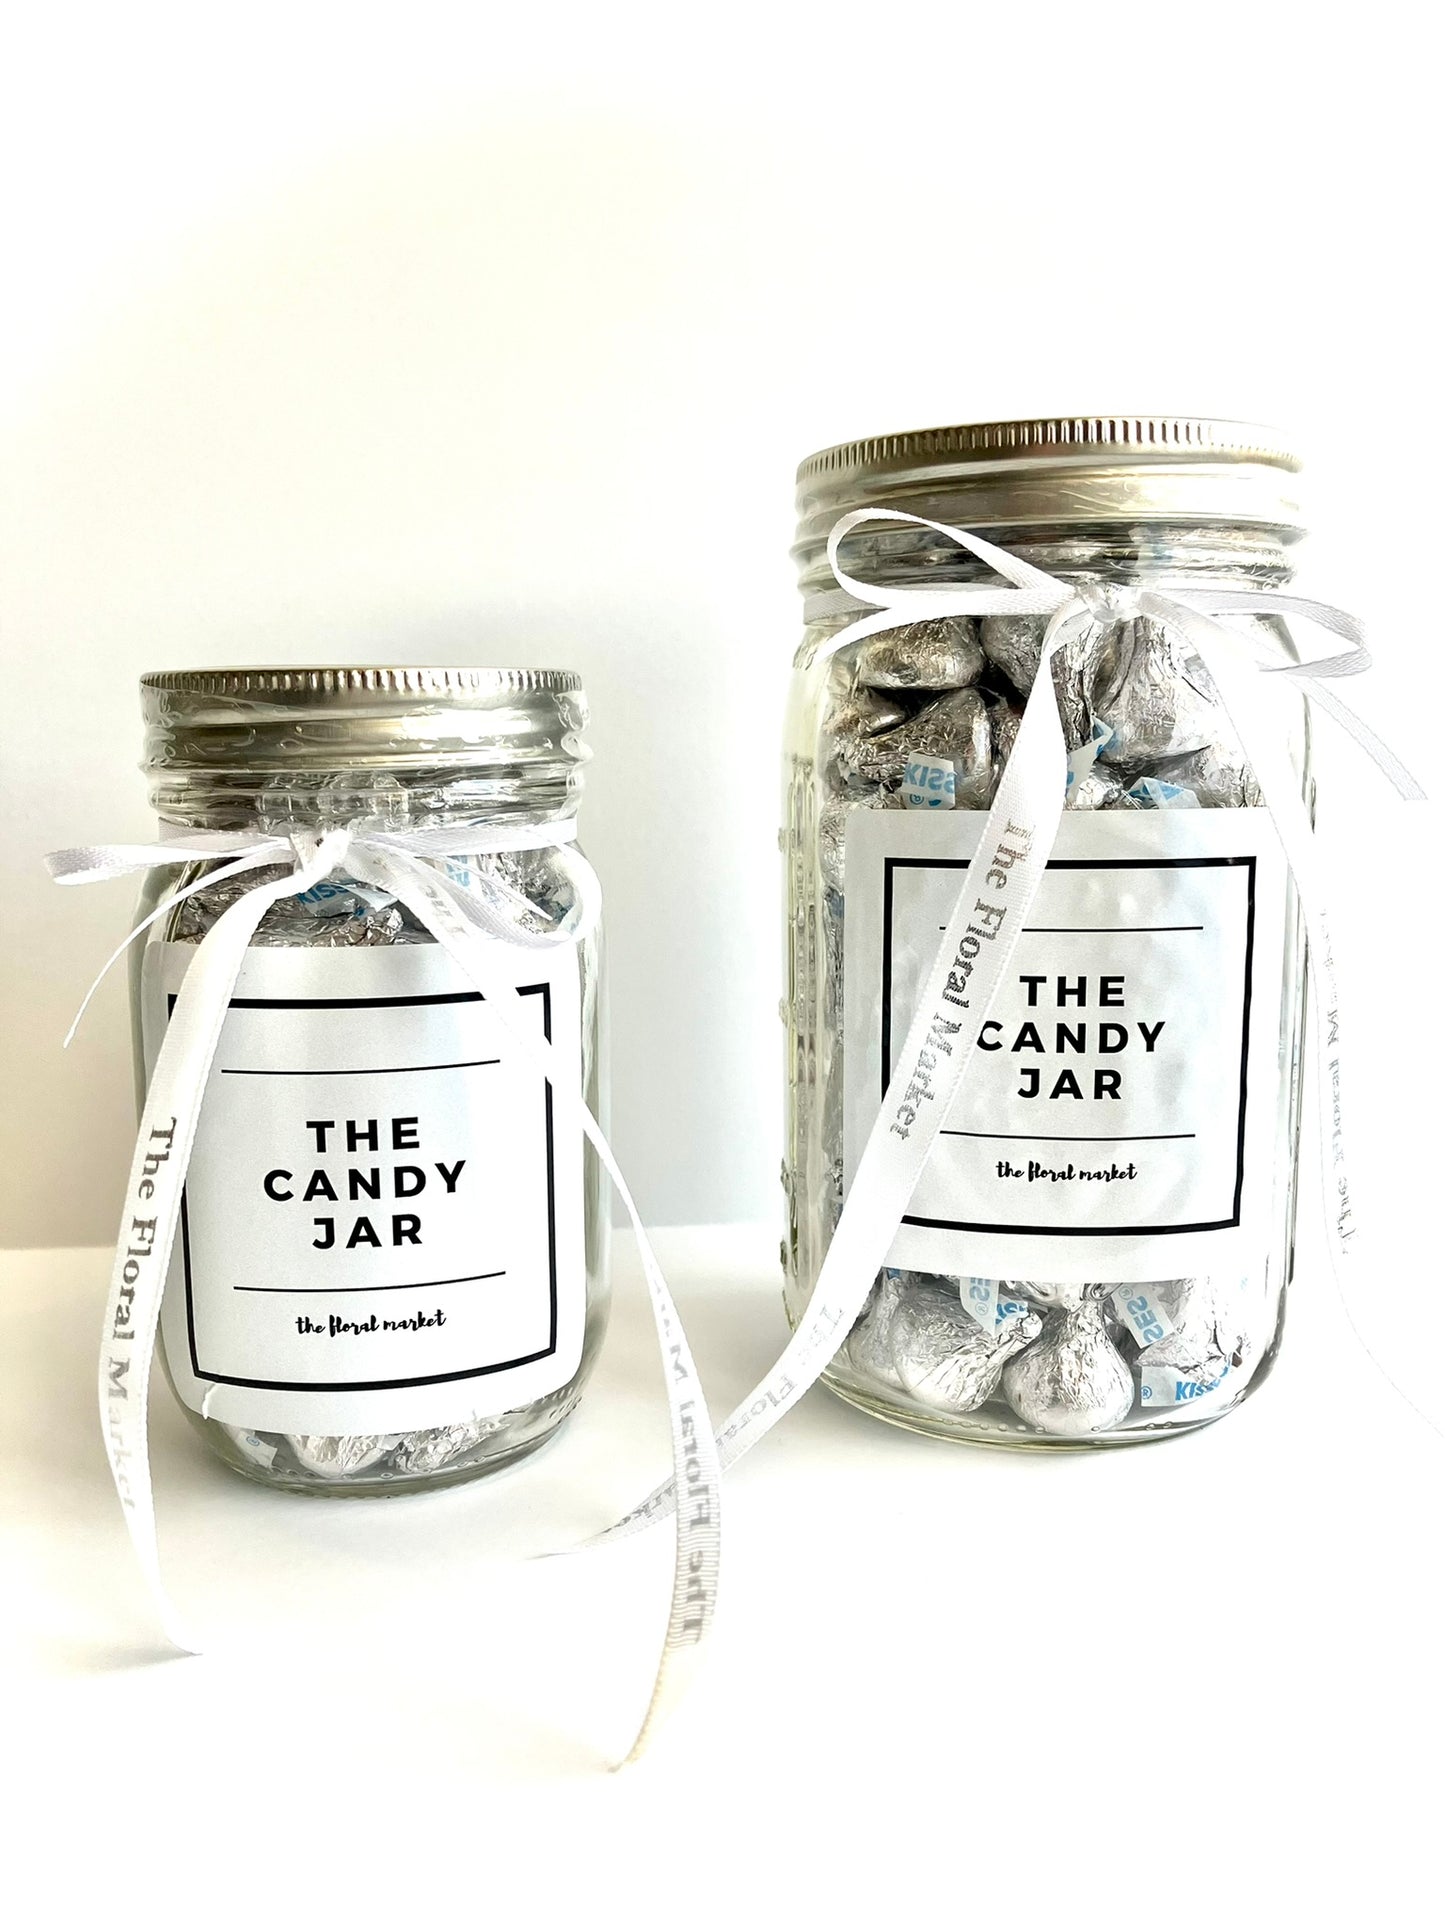 The Candy Jar- Hershey's Kisses